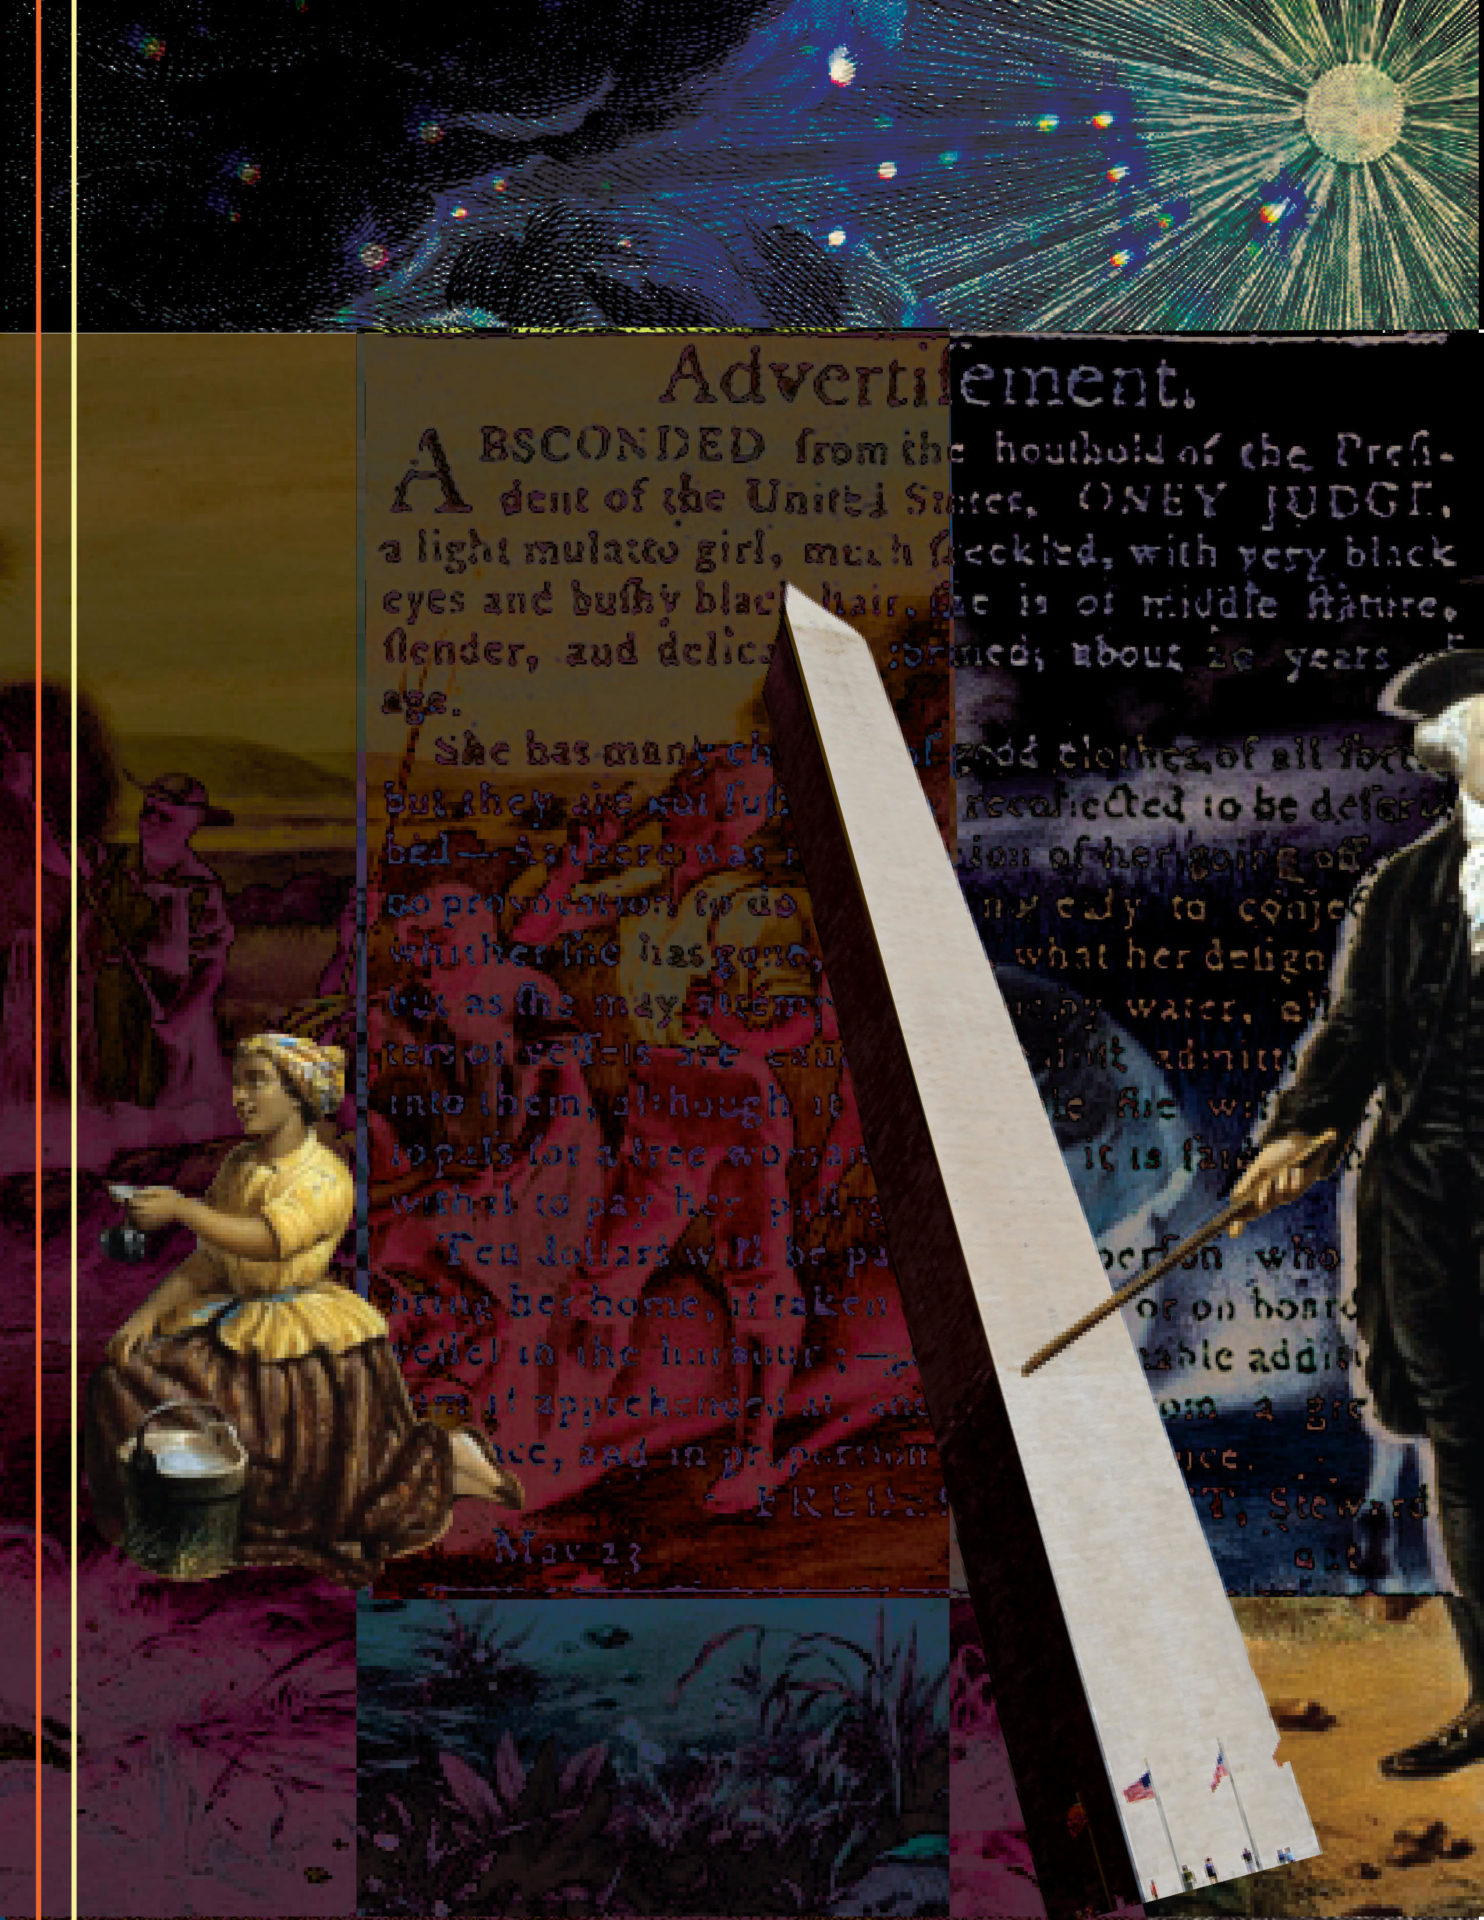 In a collage of Lorenzo Baker, Lorenzo Baker brings together George Washington and the Washignton Monument, a woman kneeling wiht a bucket of water and advertisements for people who have escaped from slavery. Press image courtesy of the artist